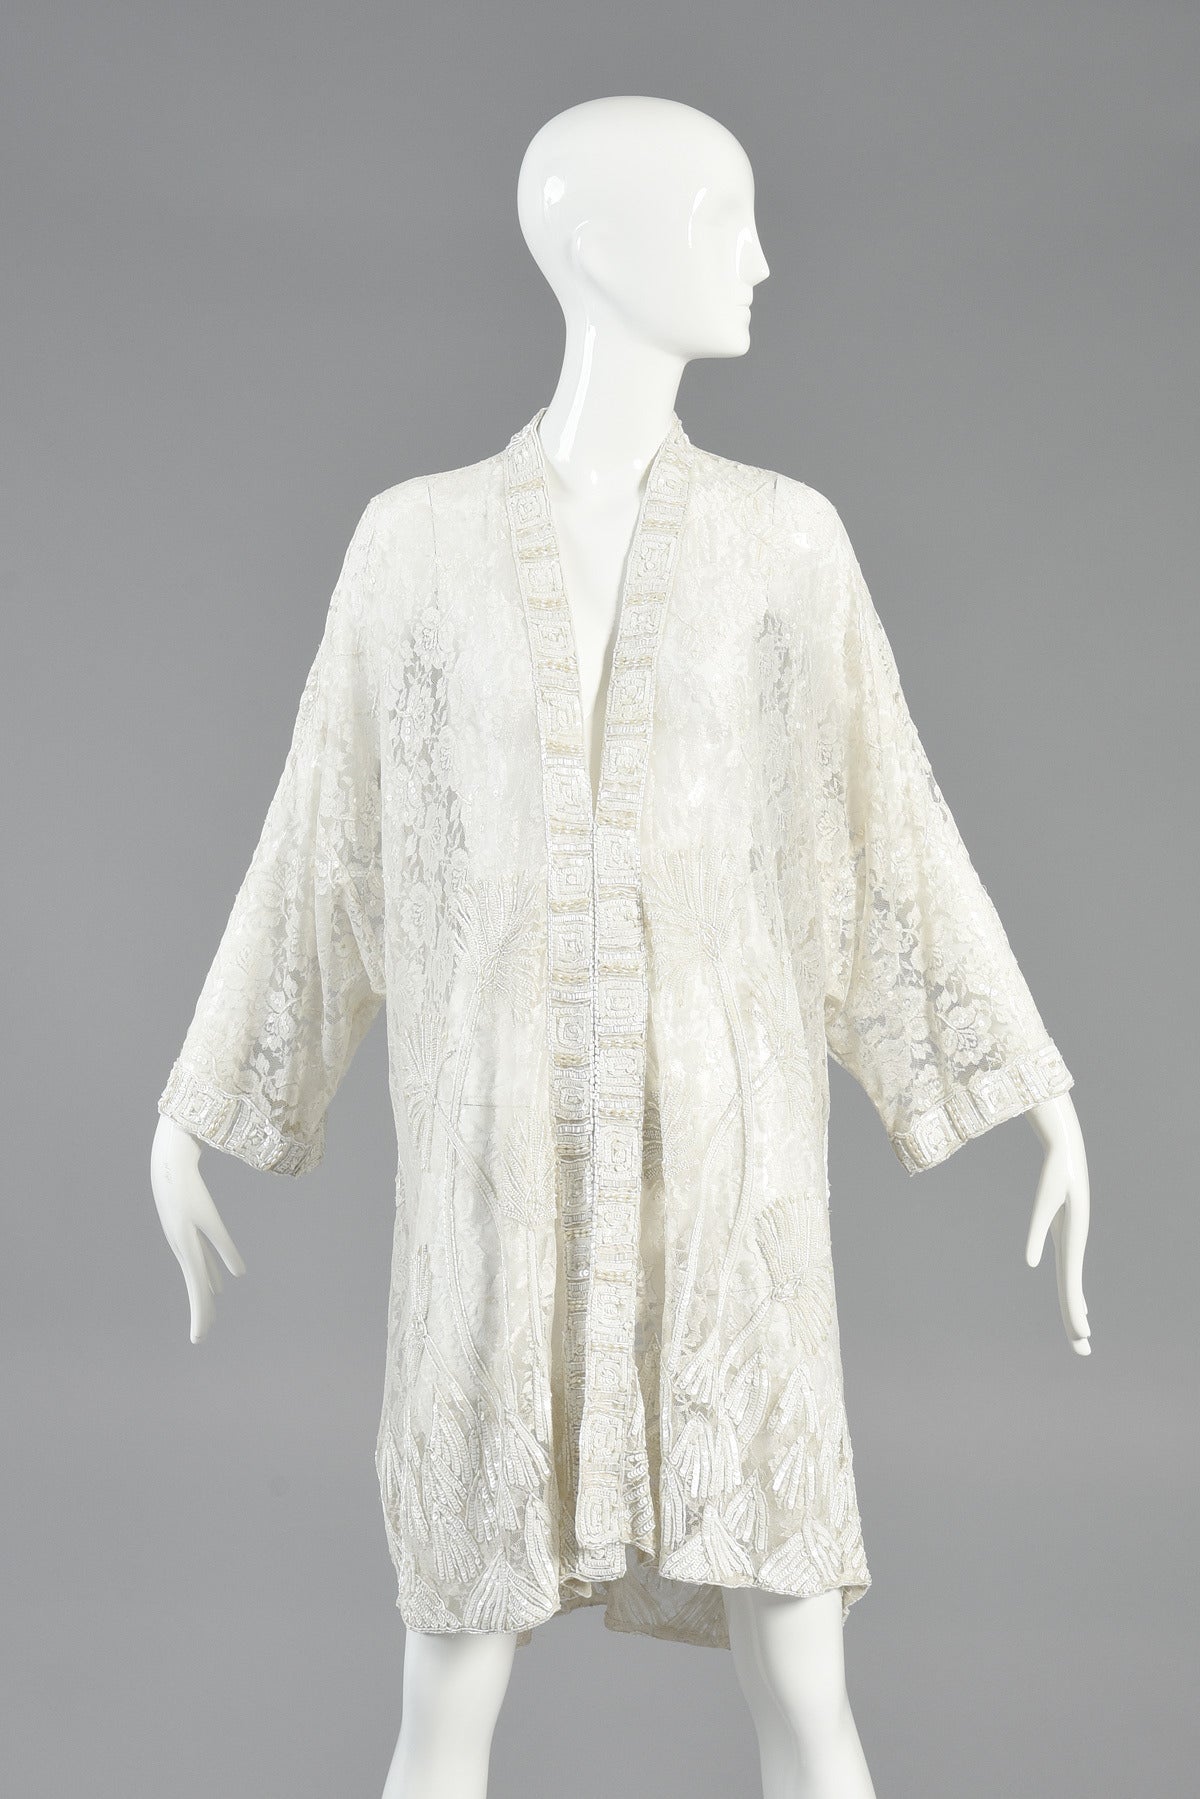 Gorgeous 1980's white beaded lace draped jacket. Incredible piece and our all-white ghost mannequins just can't do it justice!

Designed to be worn open, this piece features a sheer floral lace body and wide, kimono-like sleeves. Beautiful Art